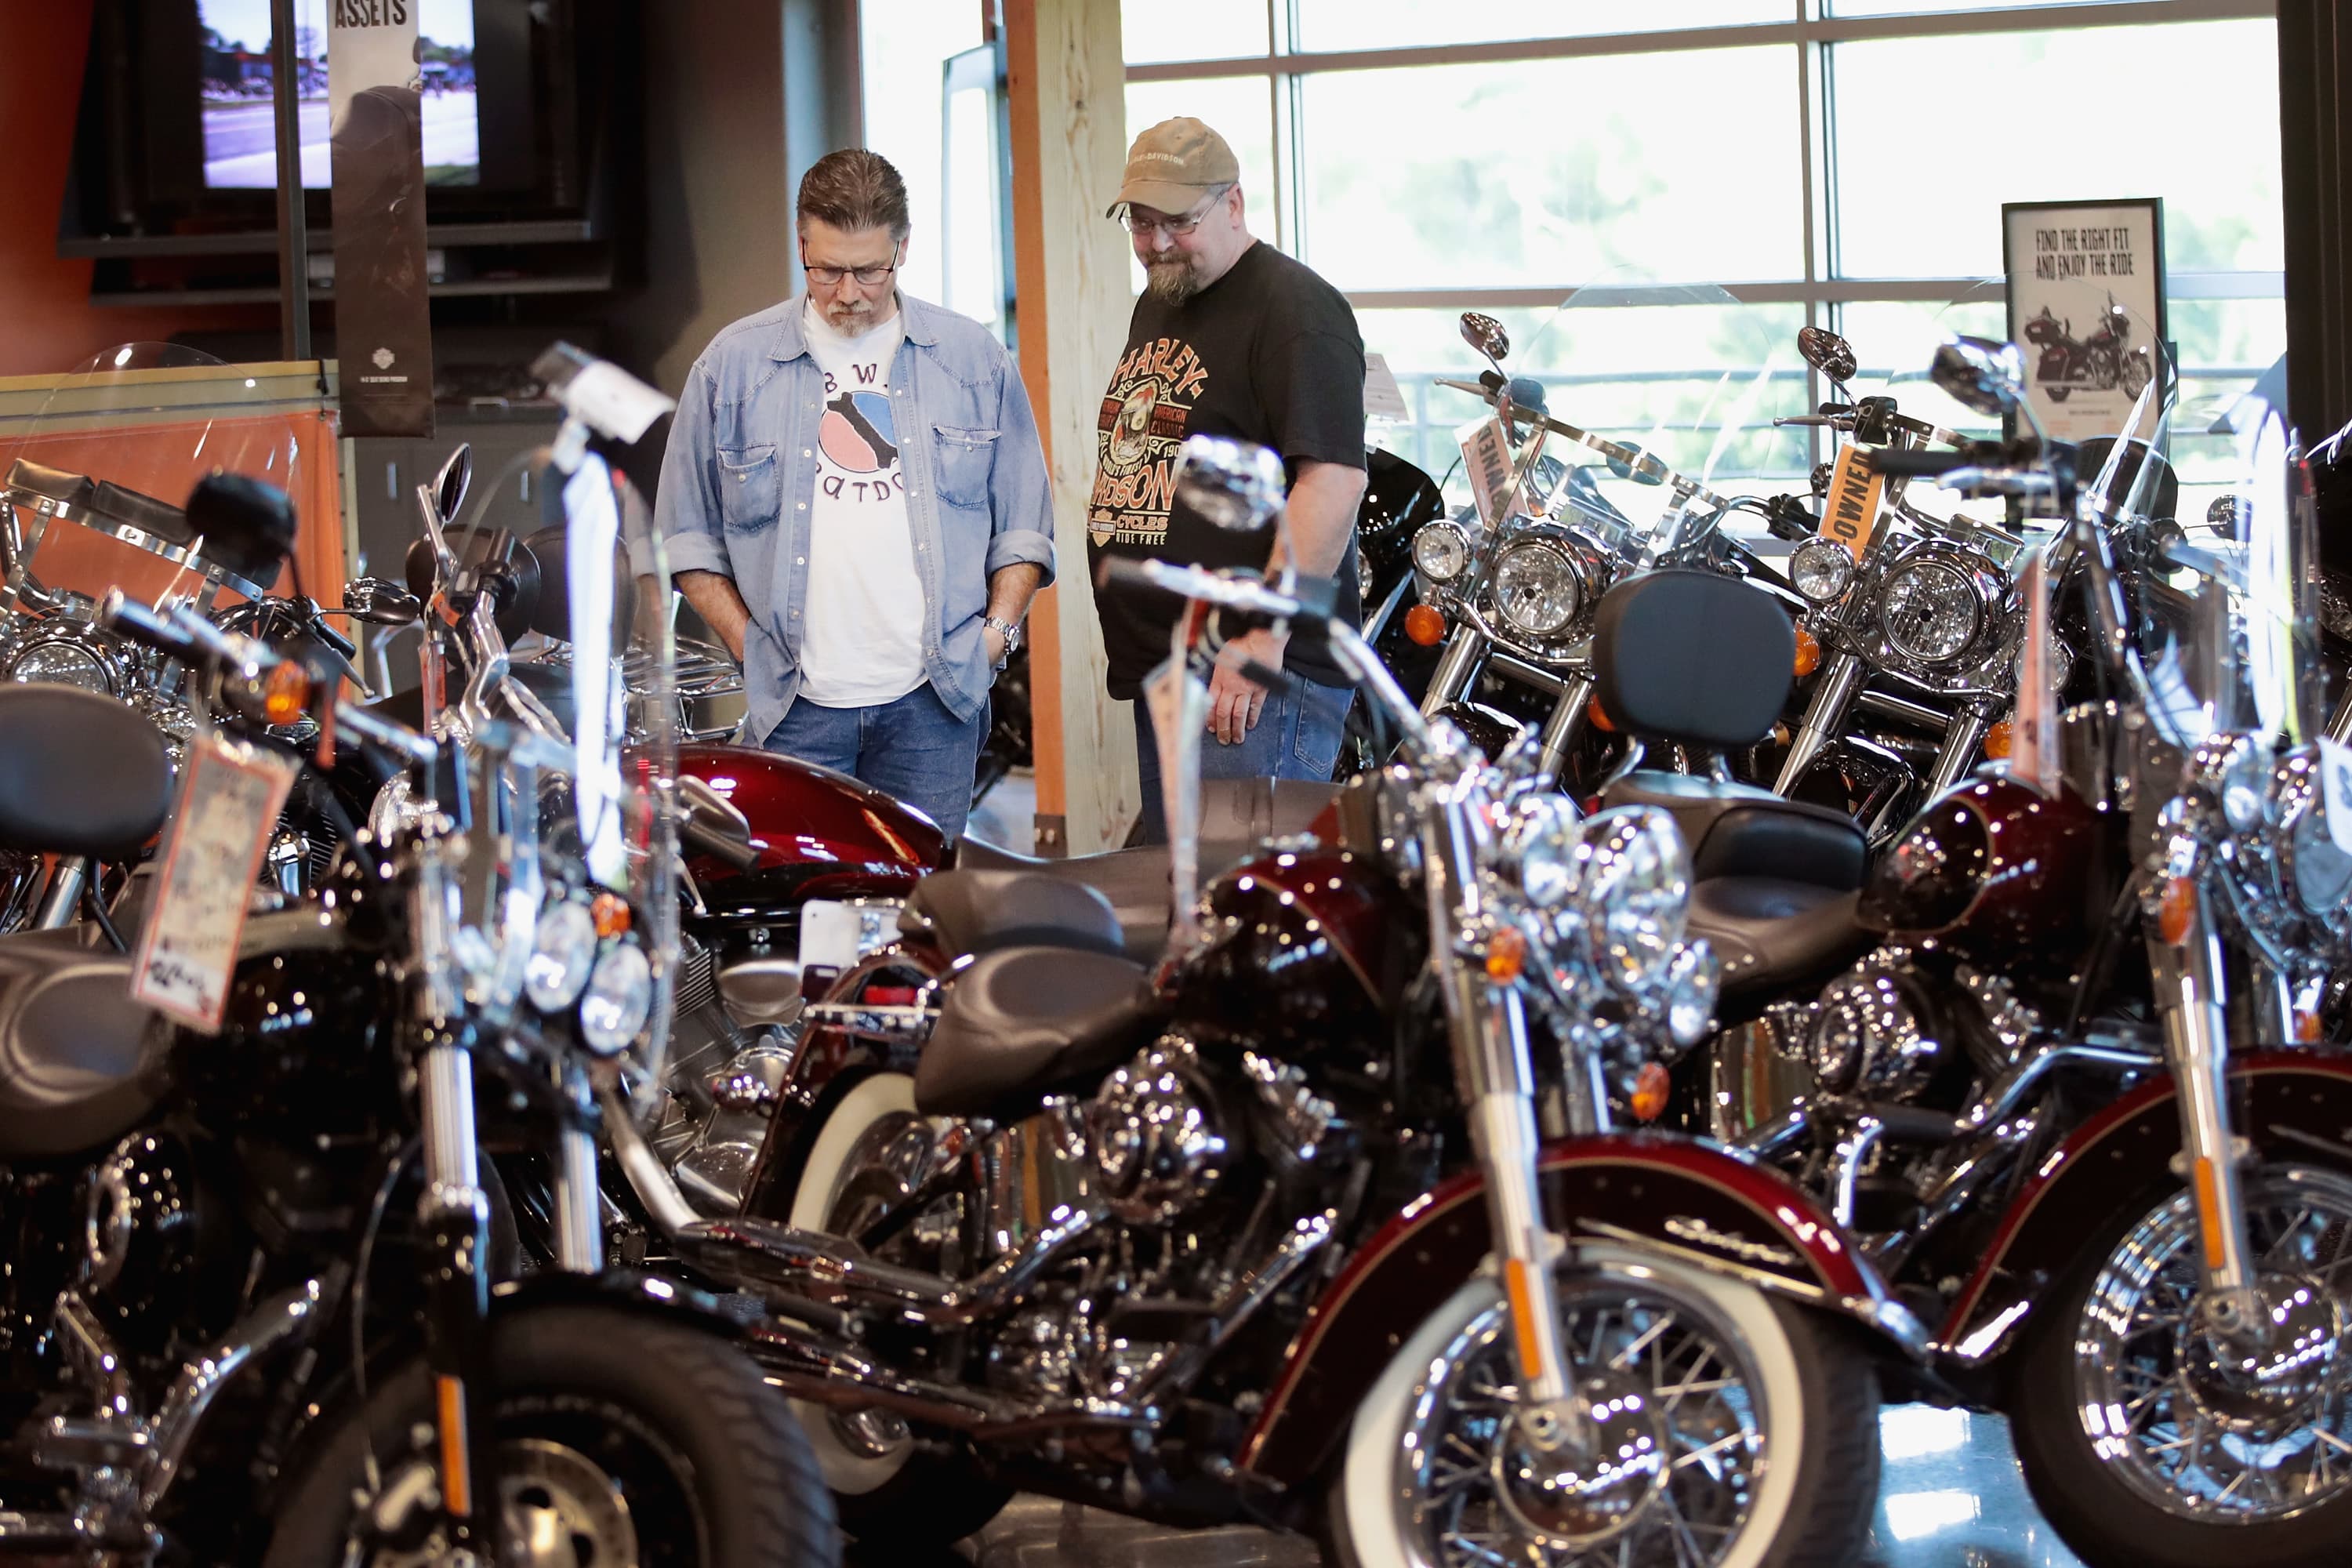 Shares of Harley-Davidson could drop nearly 20% as growth story 'has no legs,' says Jefferies